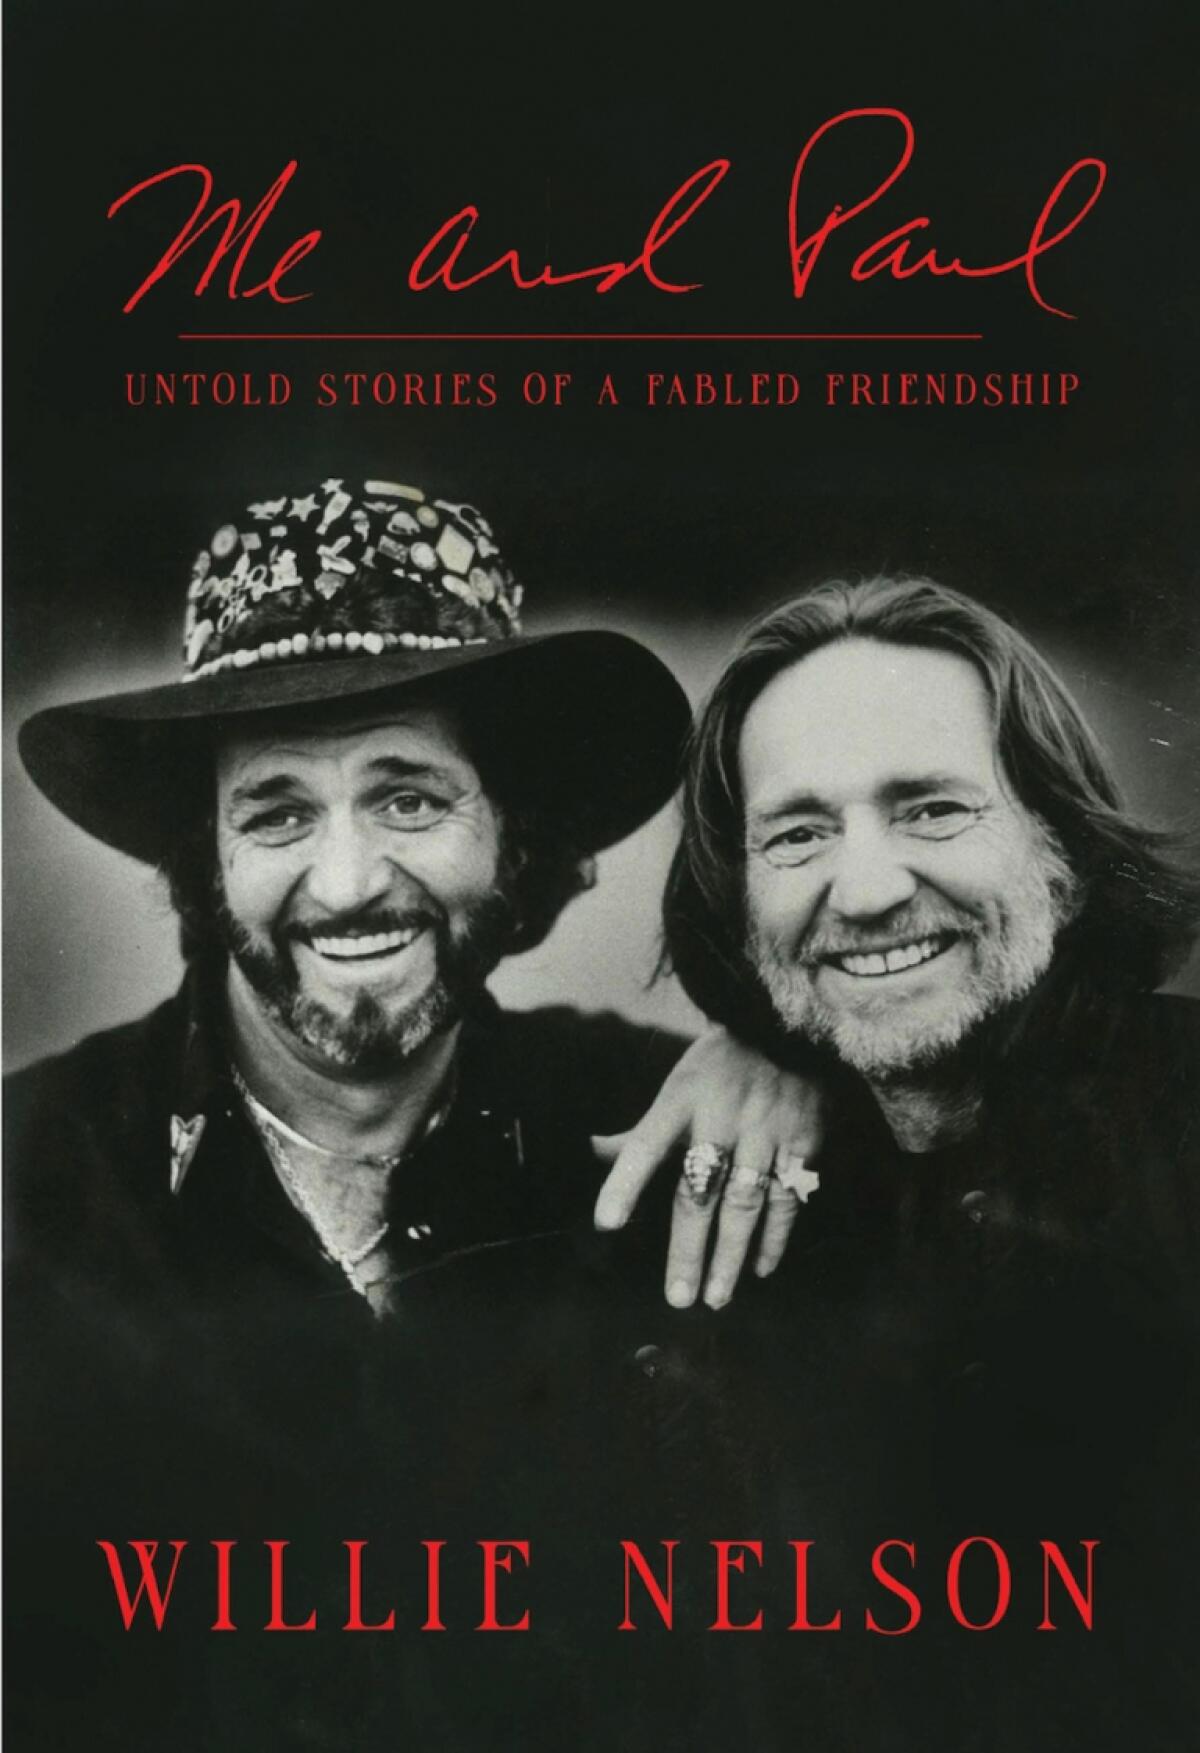 Book cover for "Me and Paul," by Willie Nelson.